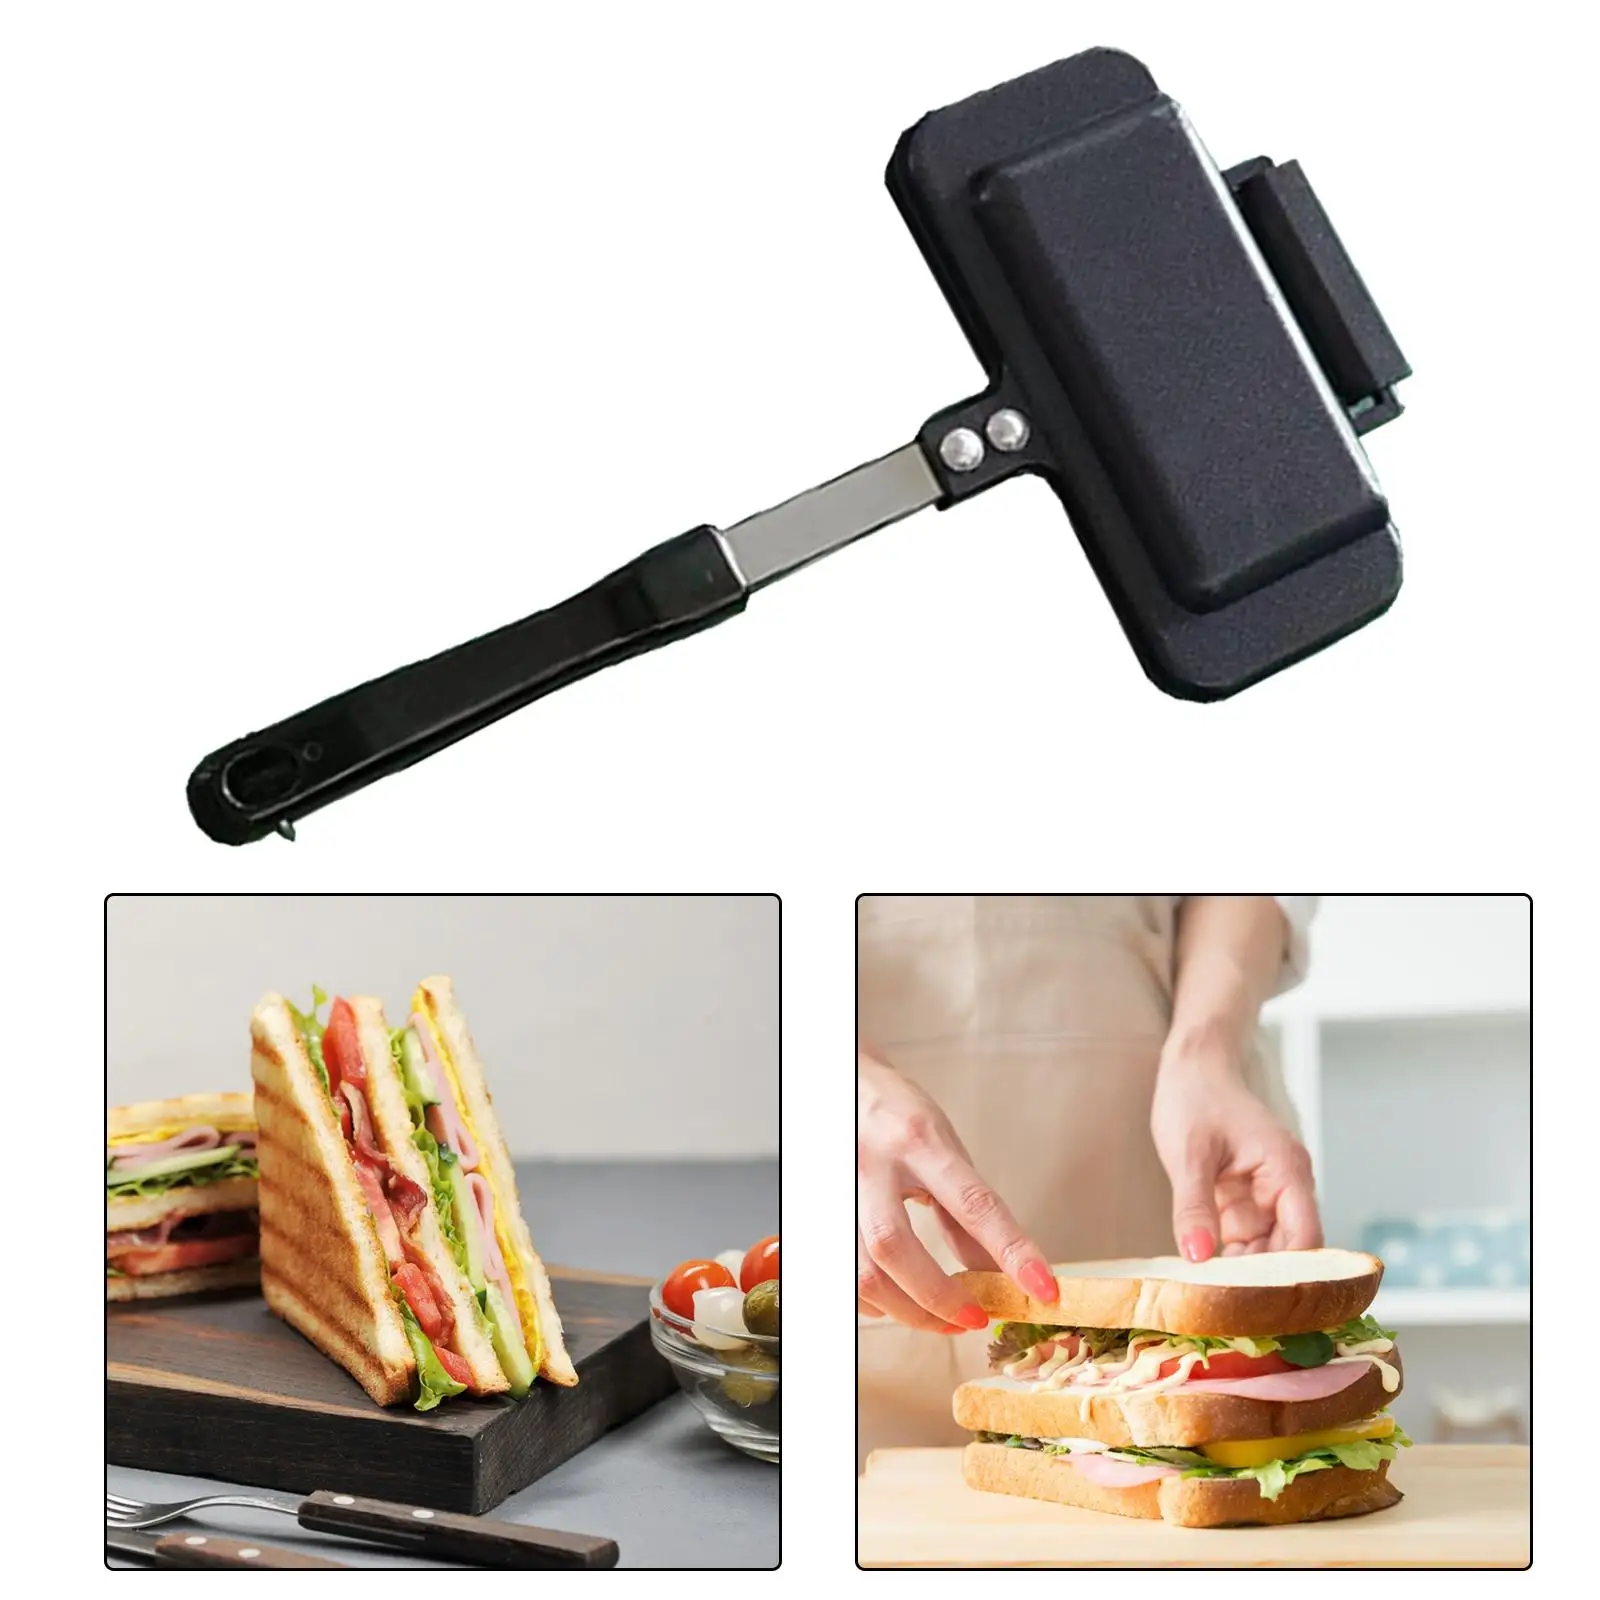 Breakfast Sandwich Maker Double Sided Frying Pan Grill Pan Sandwich Baking Pan for Breakfast Tortillas Muffins Toast Dining Room